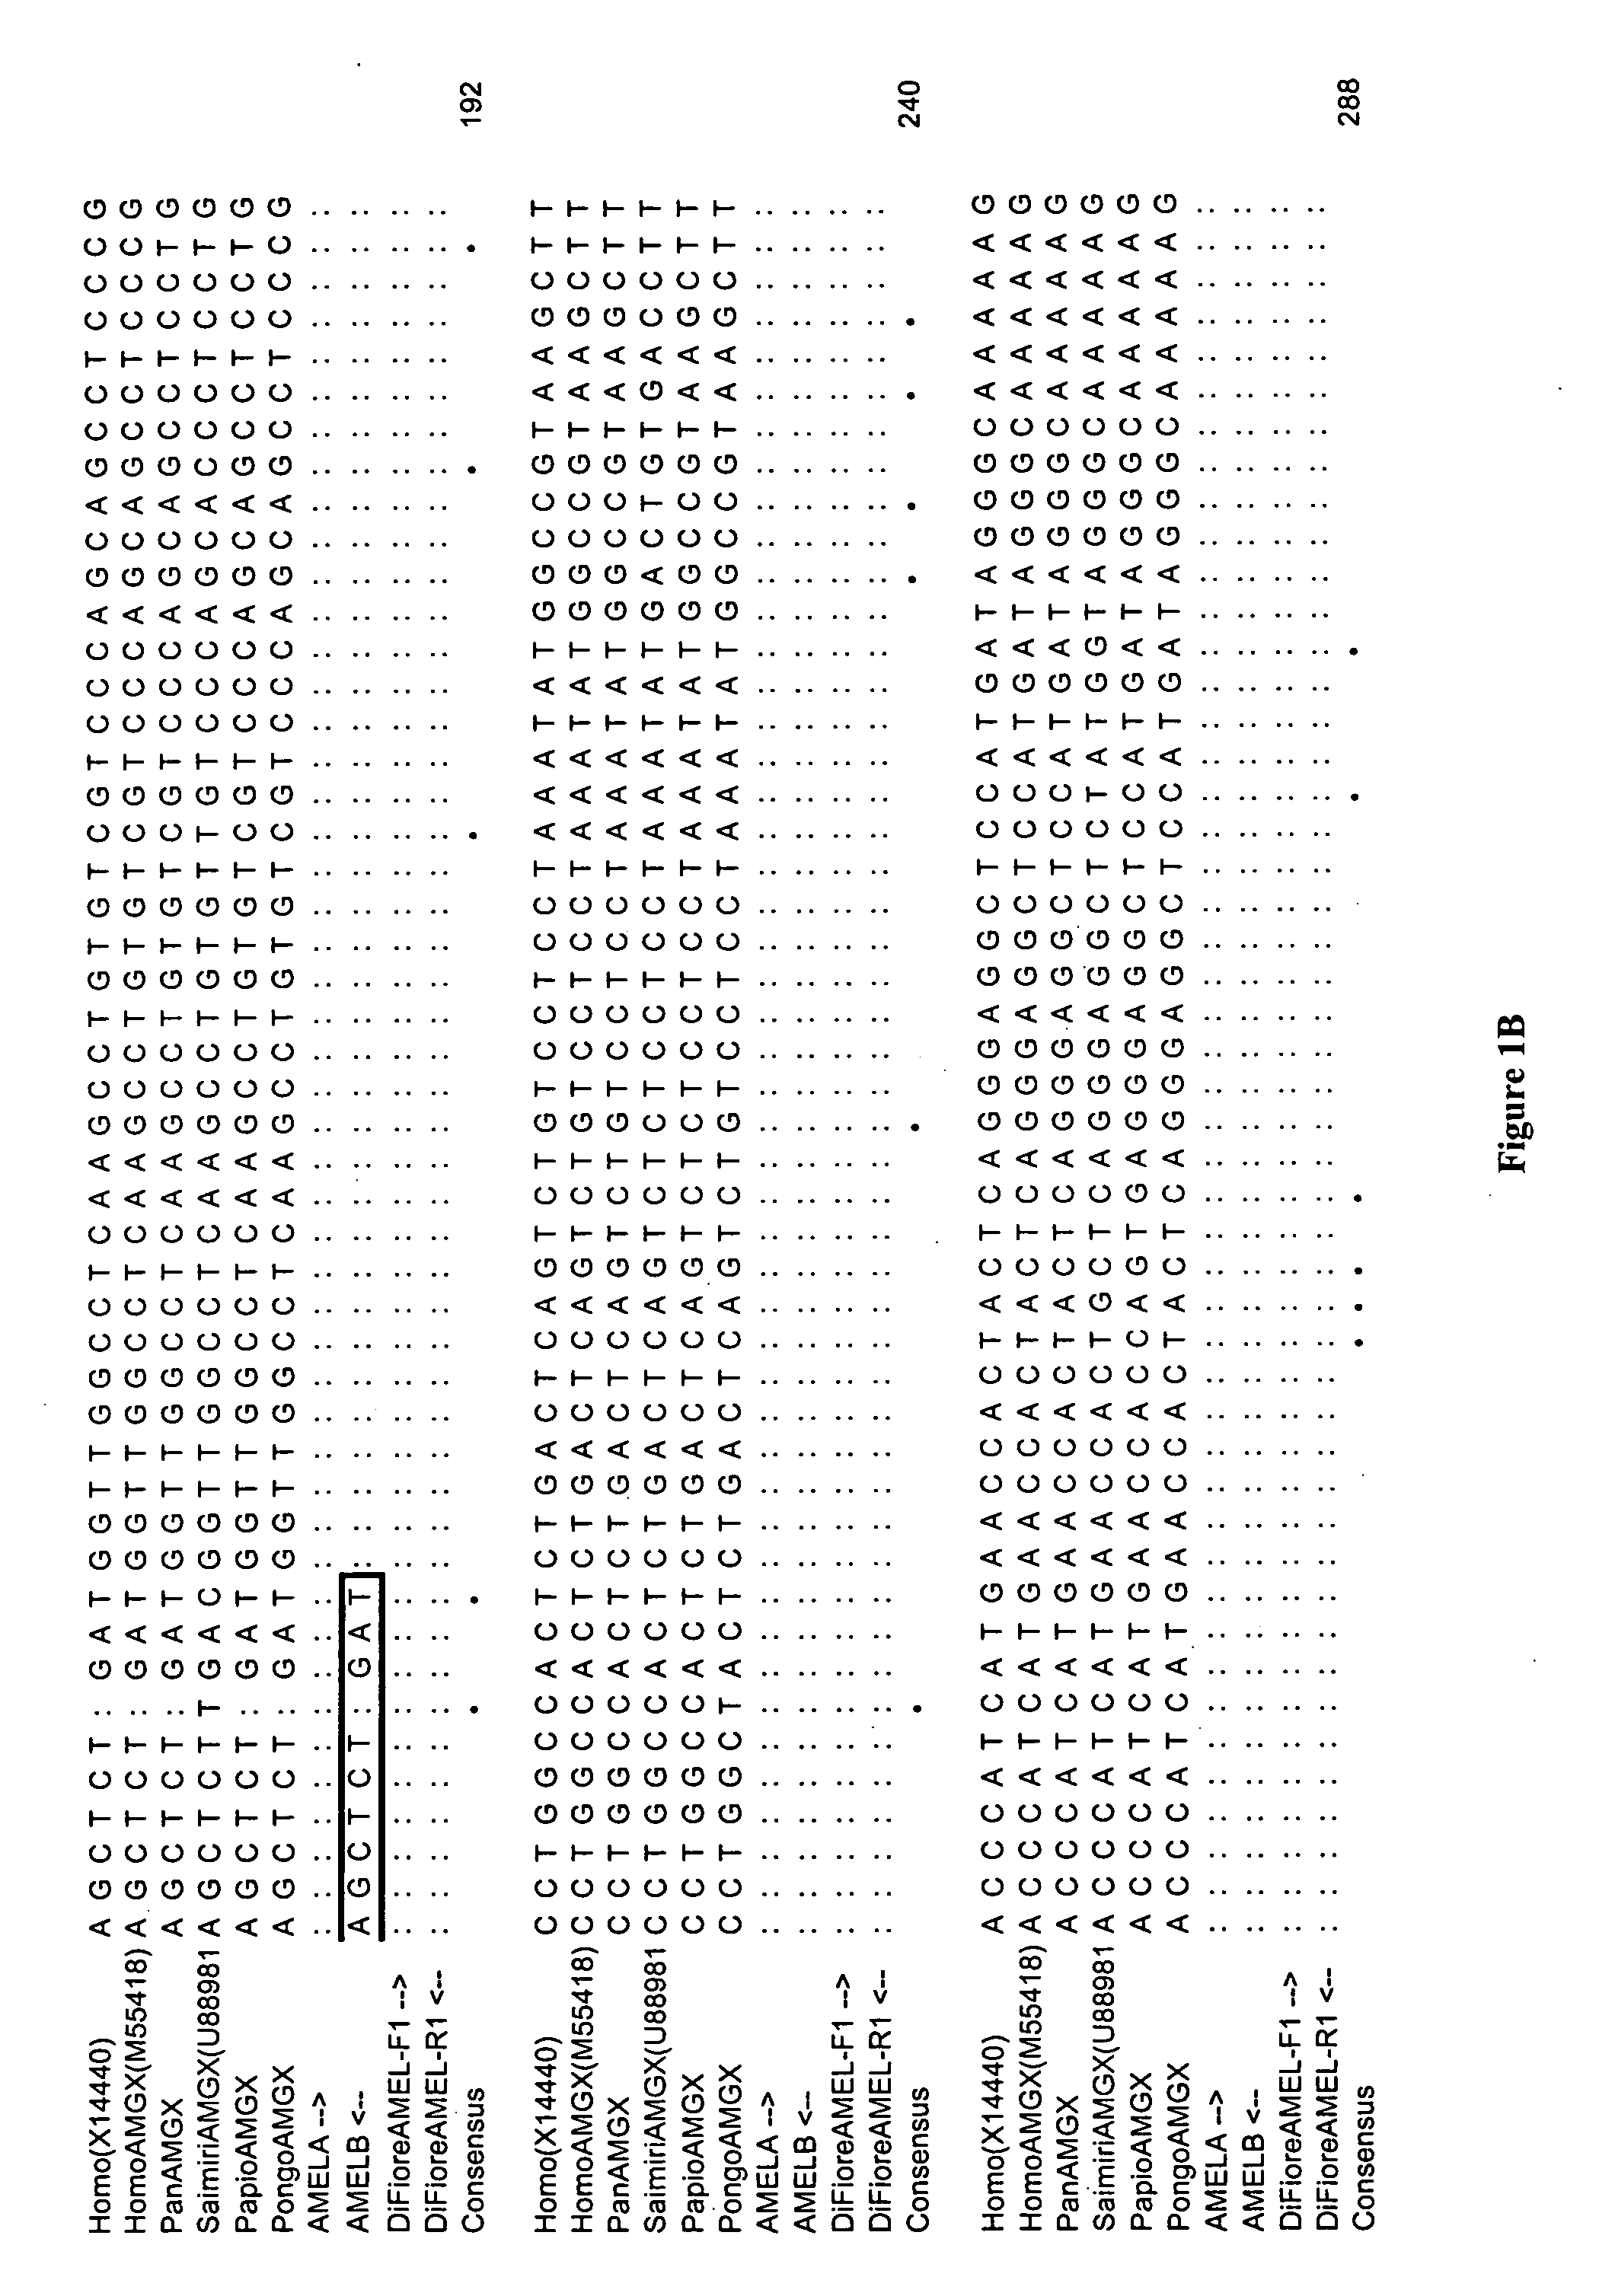 Assay for determining the sex of primates